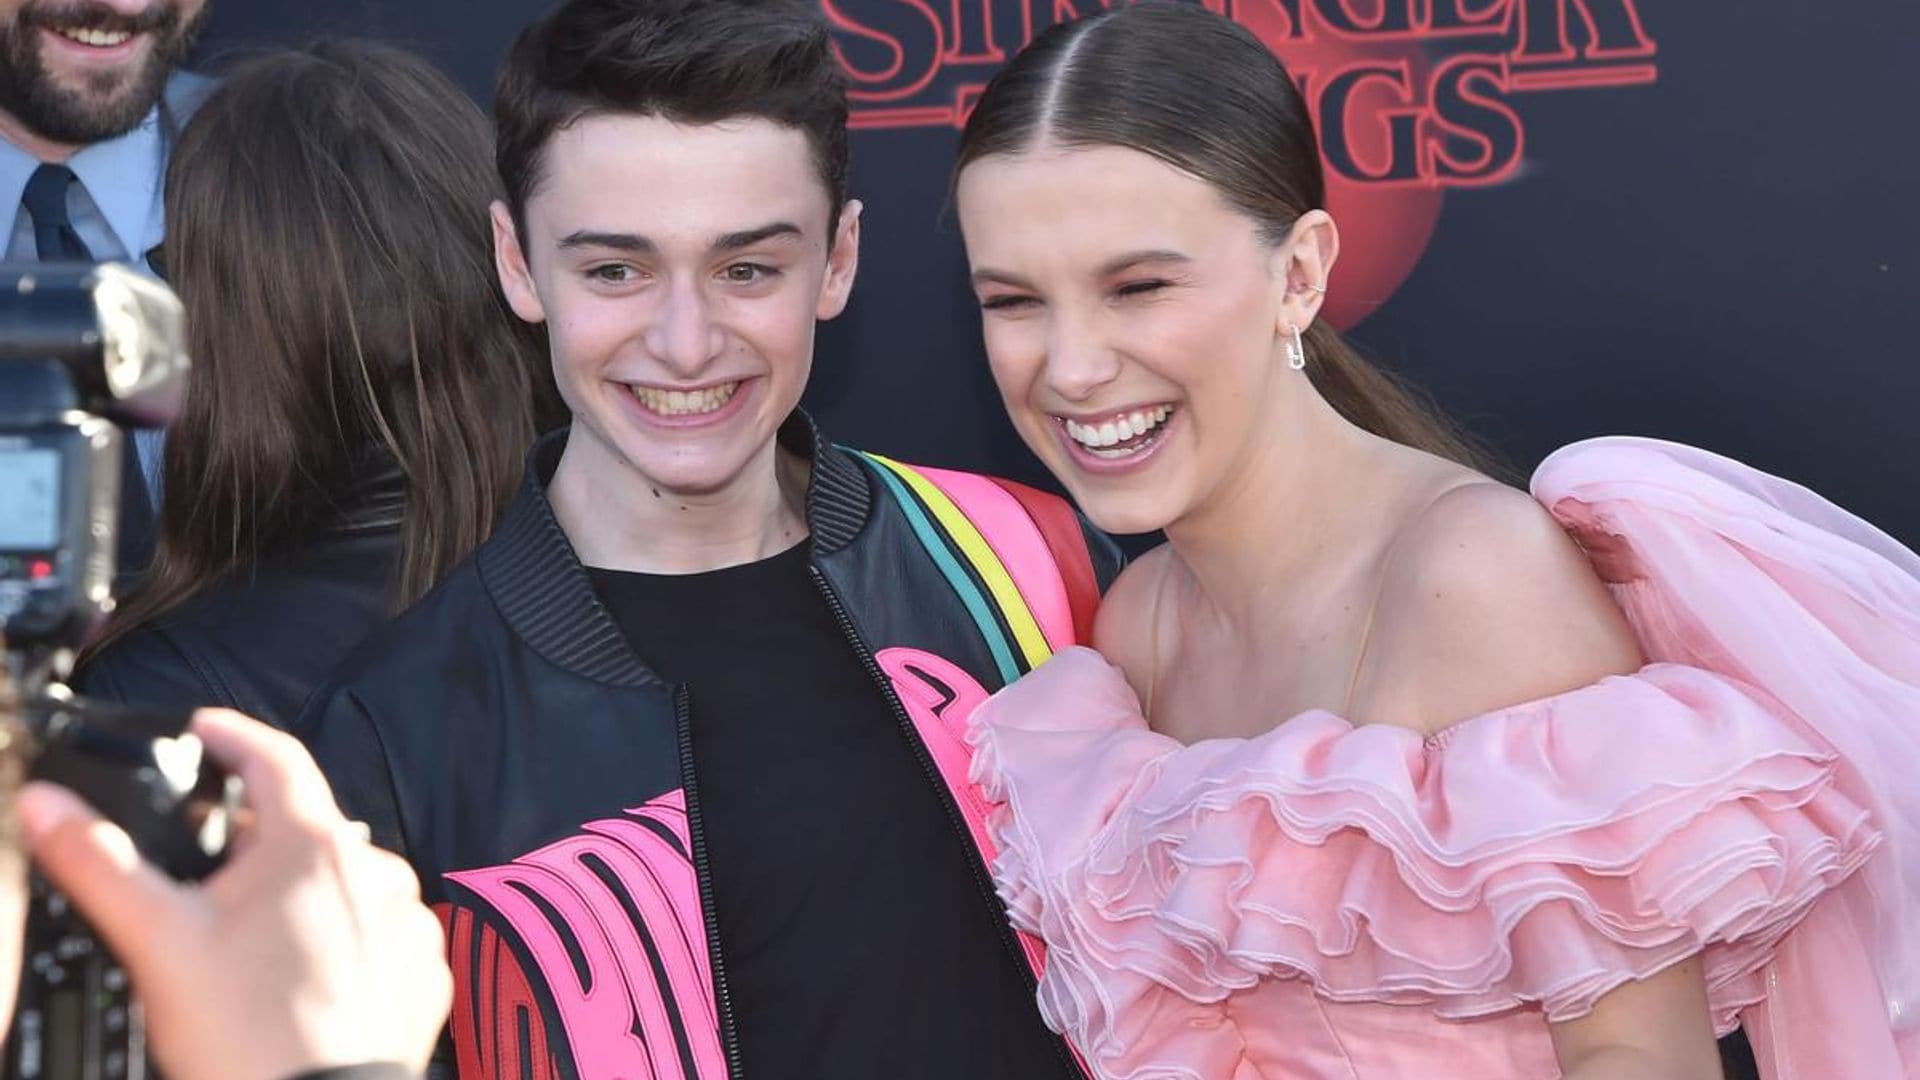 Millie Bobby Brown on Will’s sexuality in Stranger Things: ‘He’s just a human being’